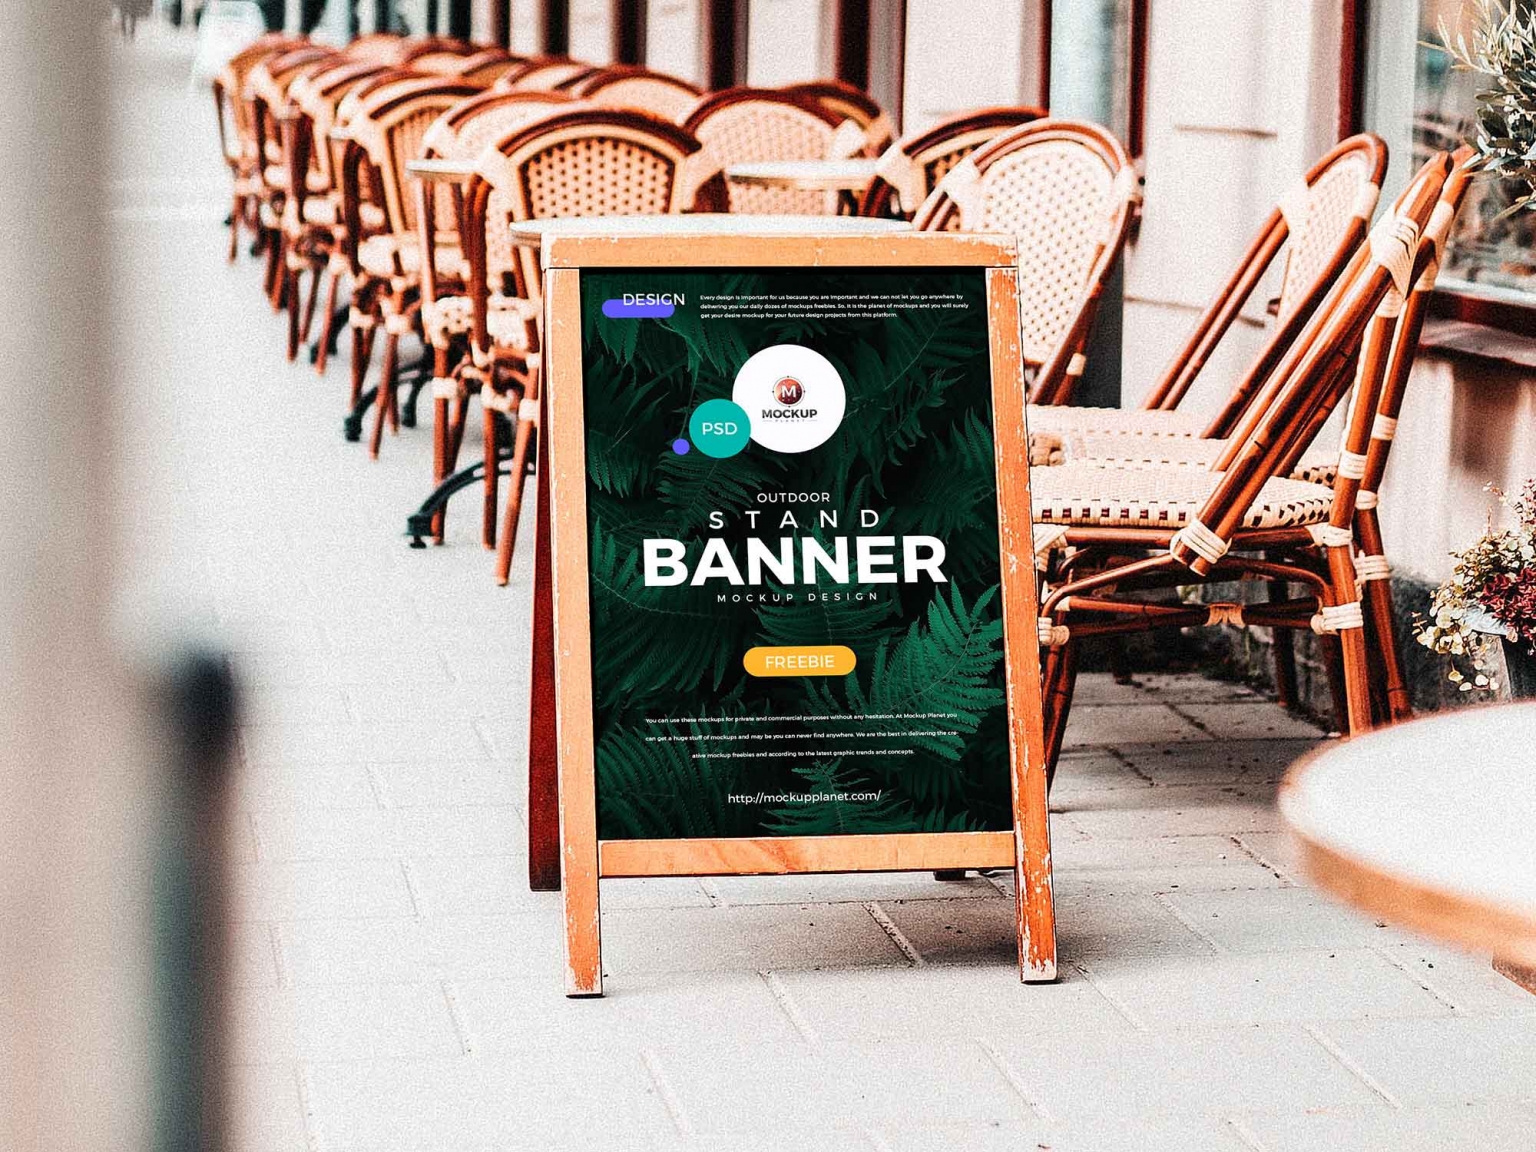 Outdoor Stand Banner Mockup Free Download